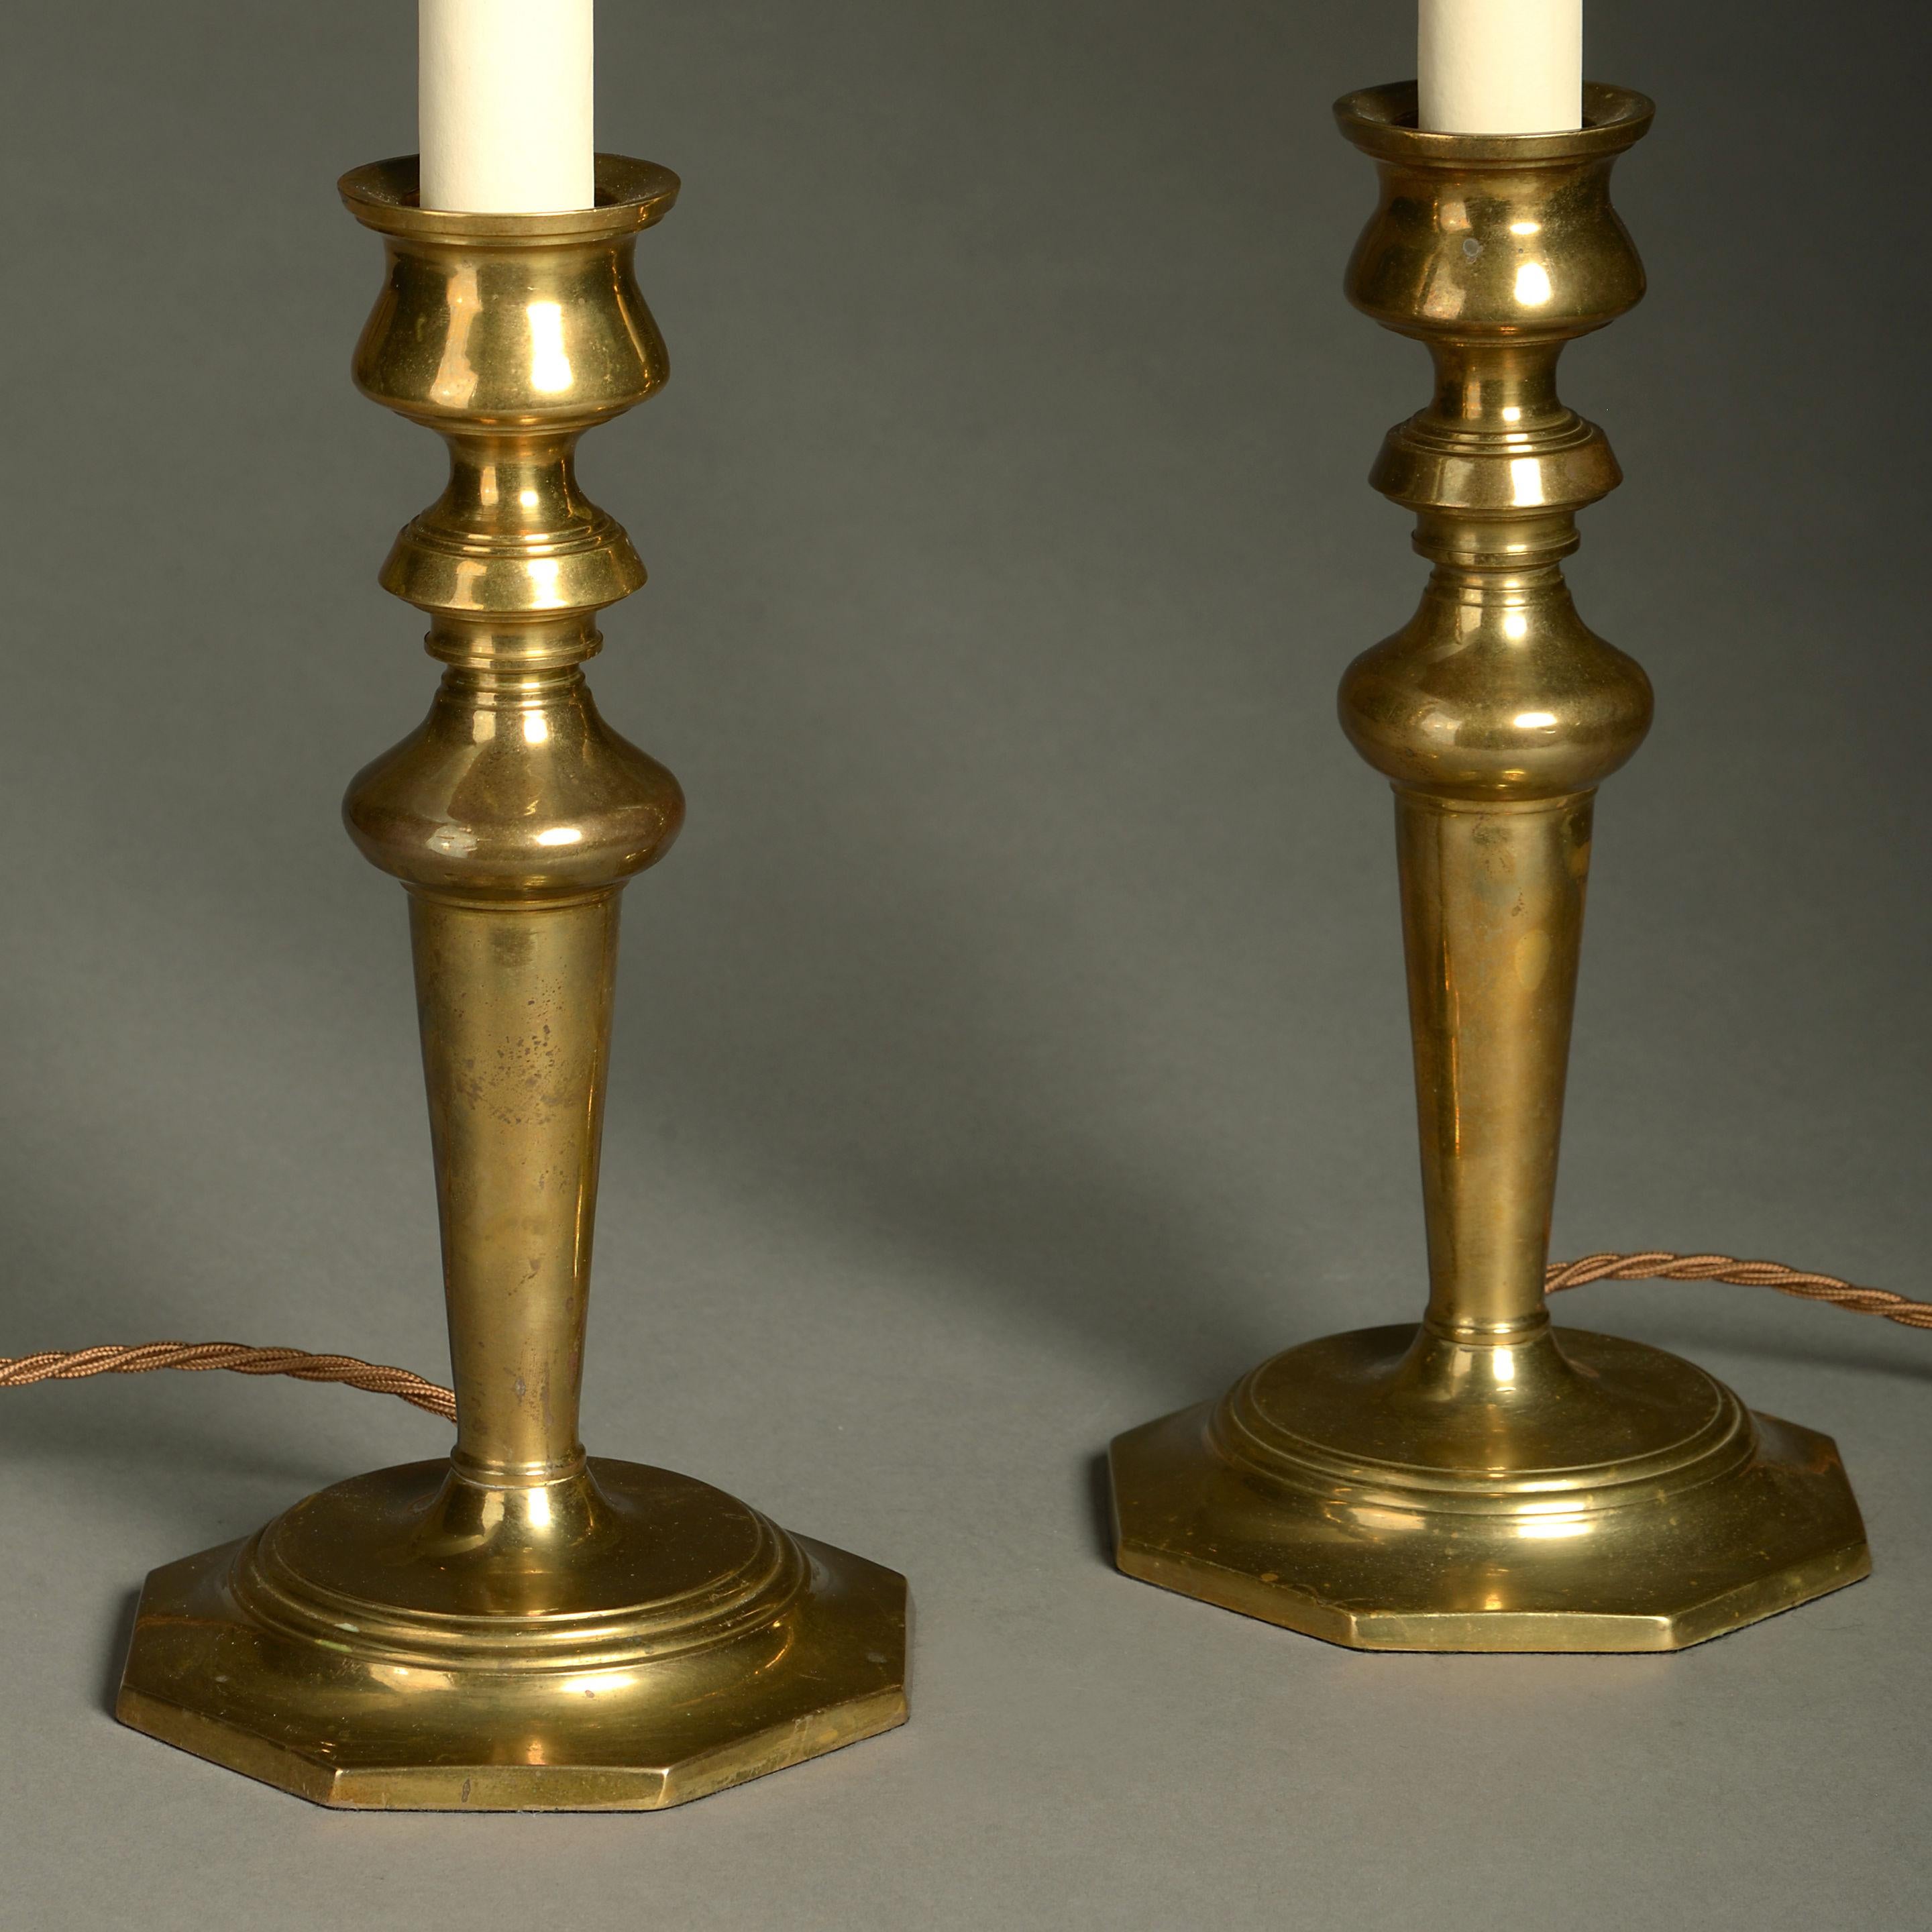 English Pair of Brass Candlestick Lamps